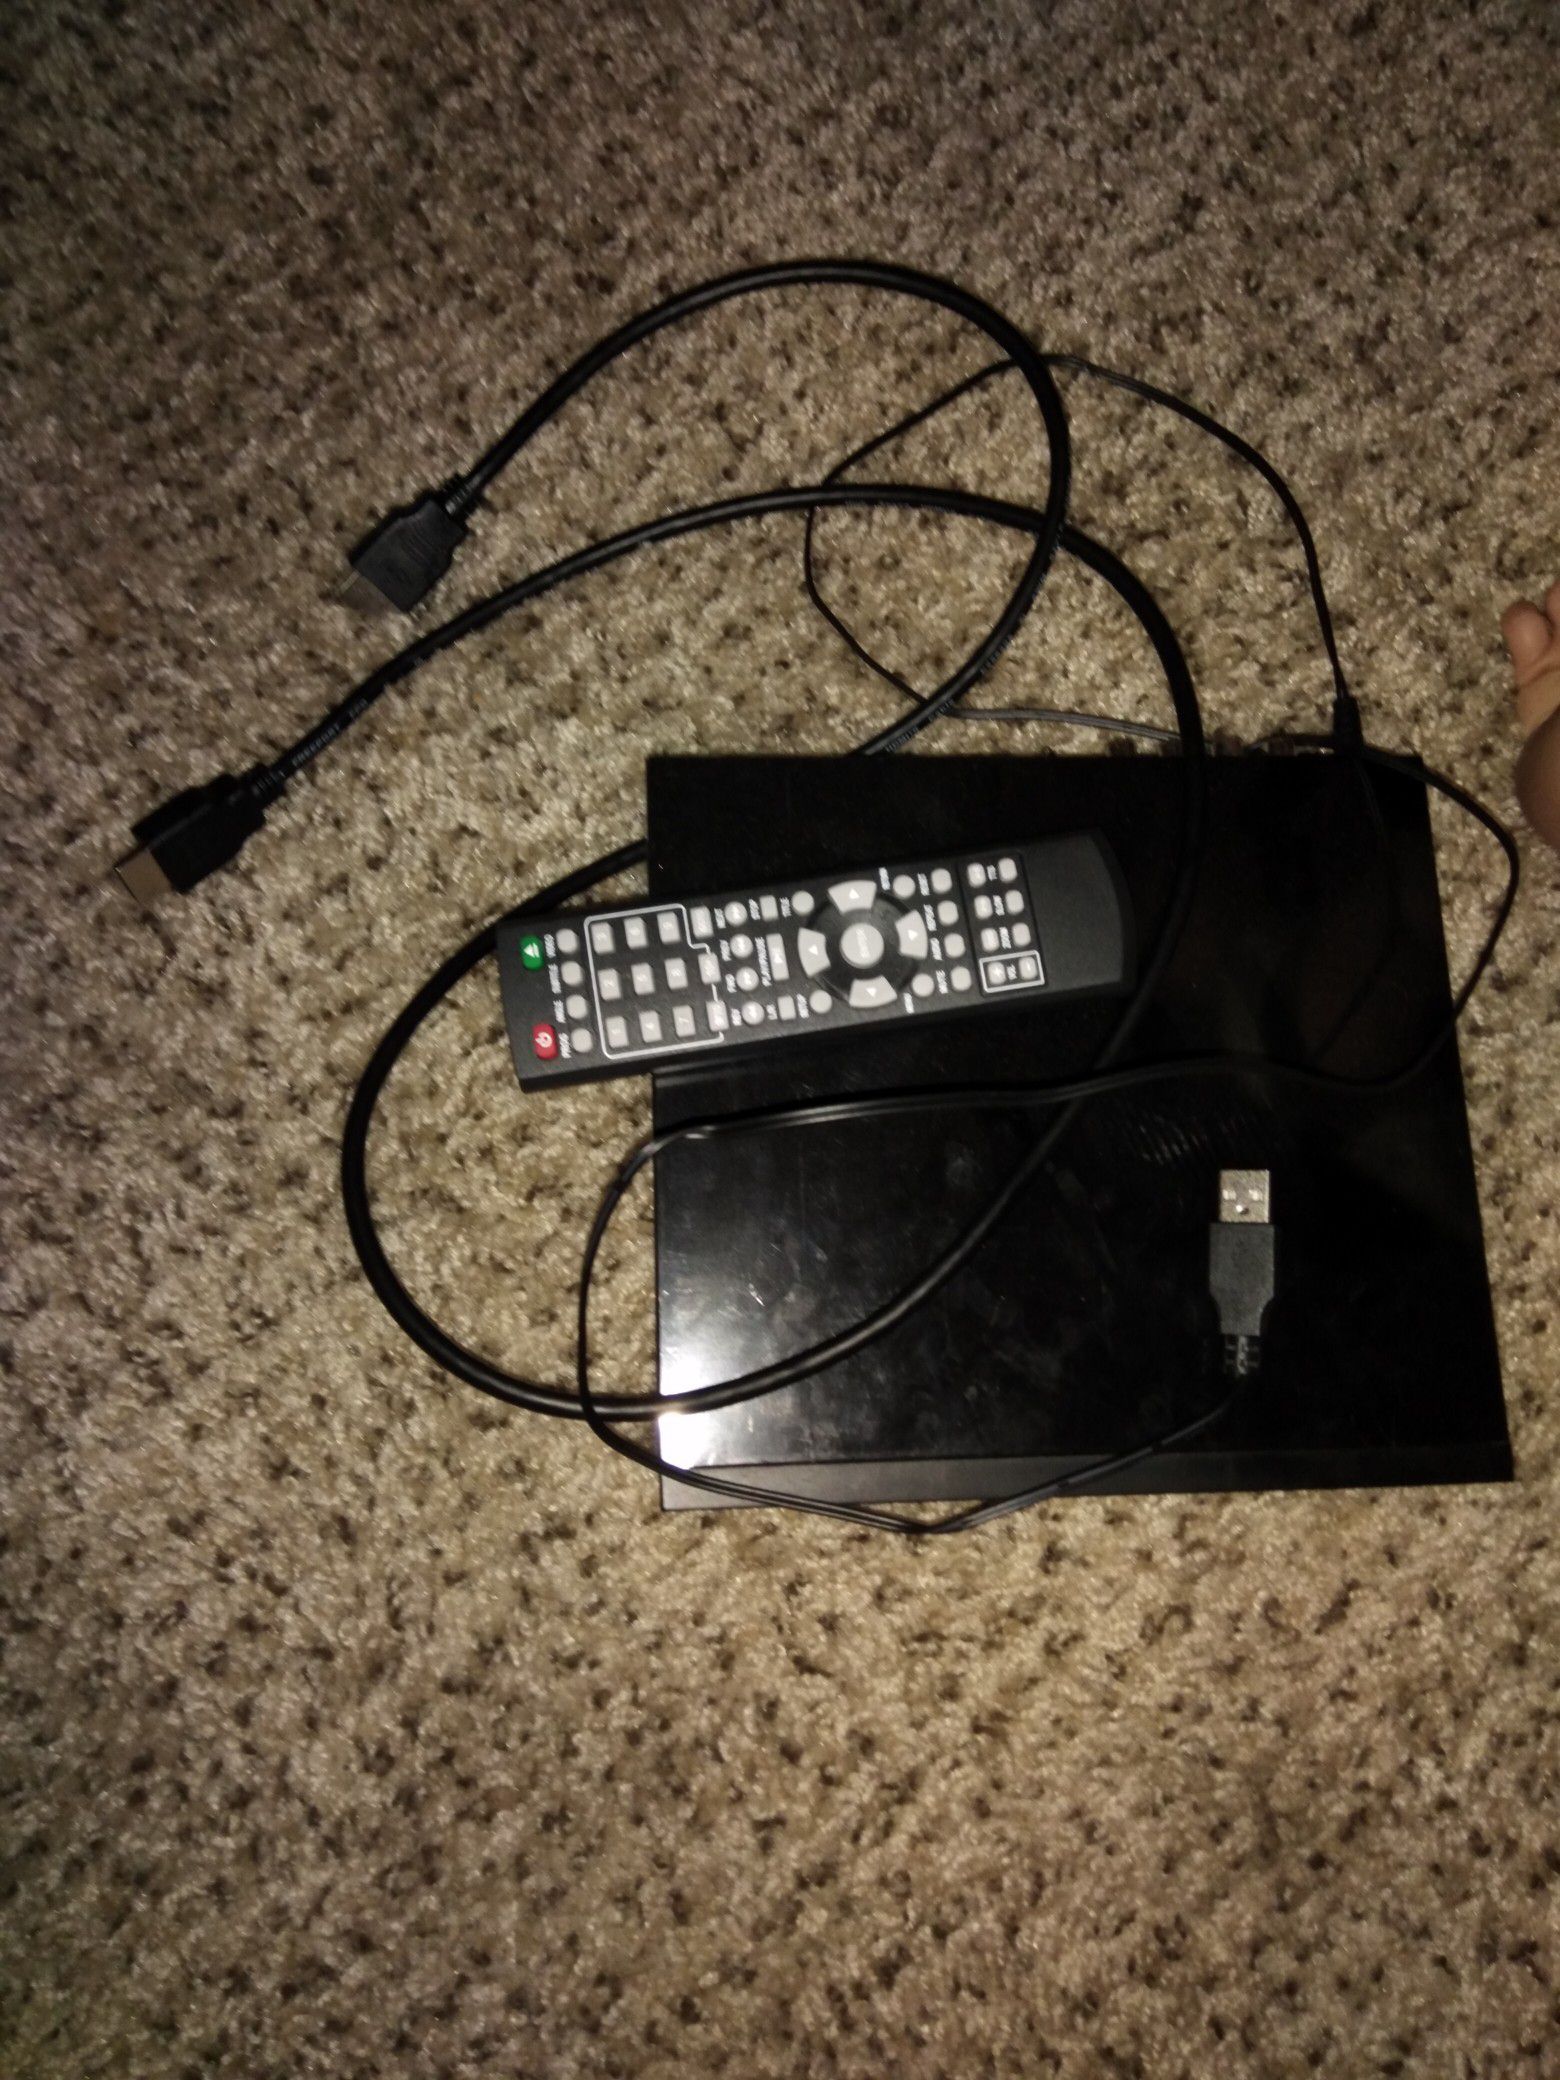 DVD player with remote